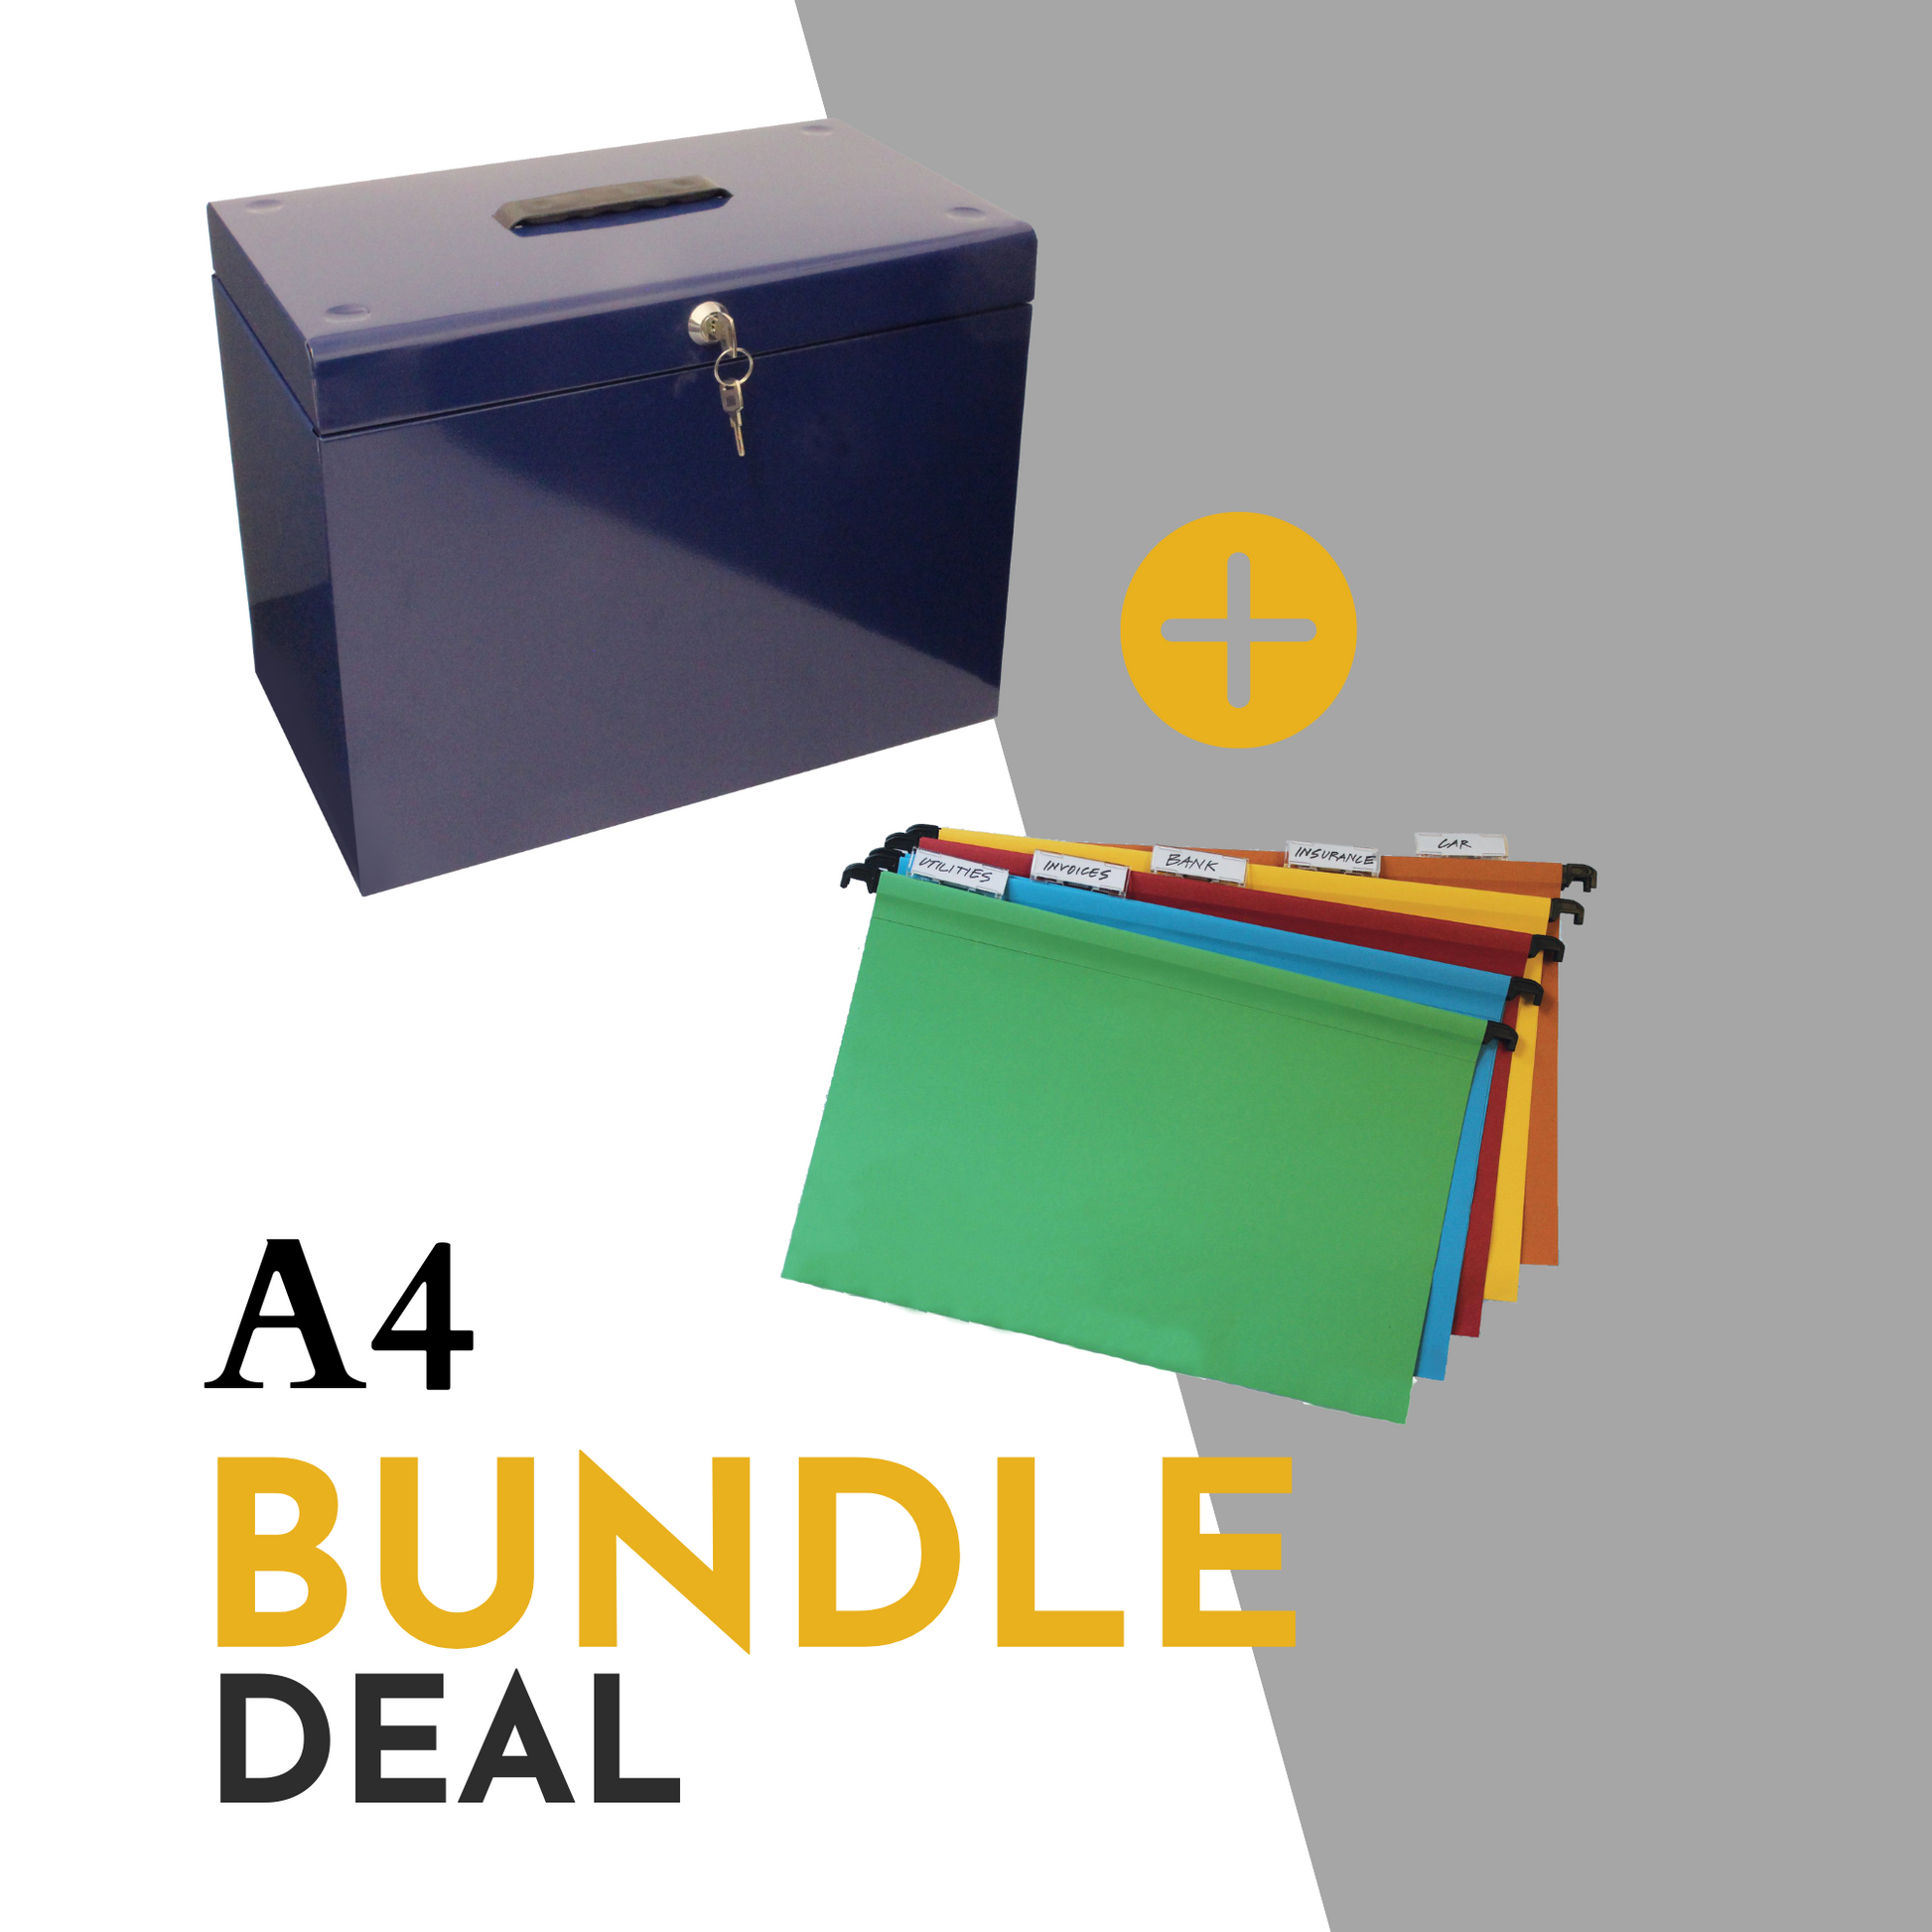 Promotional image for an A4 file storage bundle deal, including a blue file box with a handle and key lock, plus an additional set of 10 assorted color A4 suspension files with index tabs, showcasing an organized filing solution.